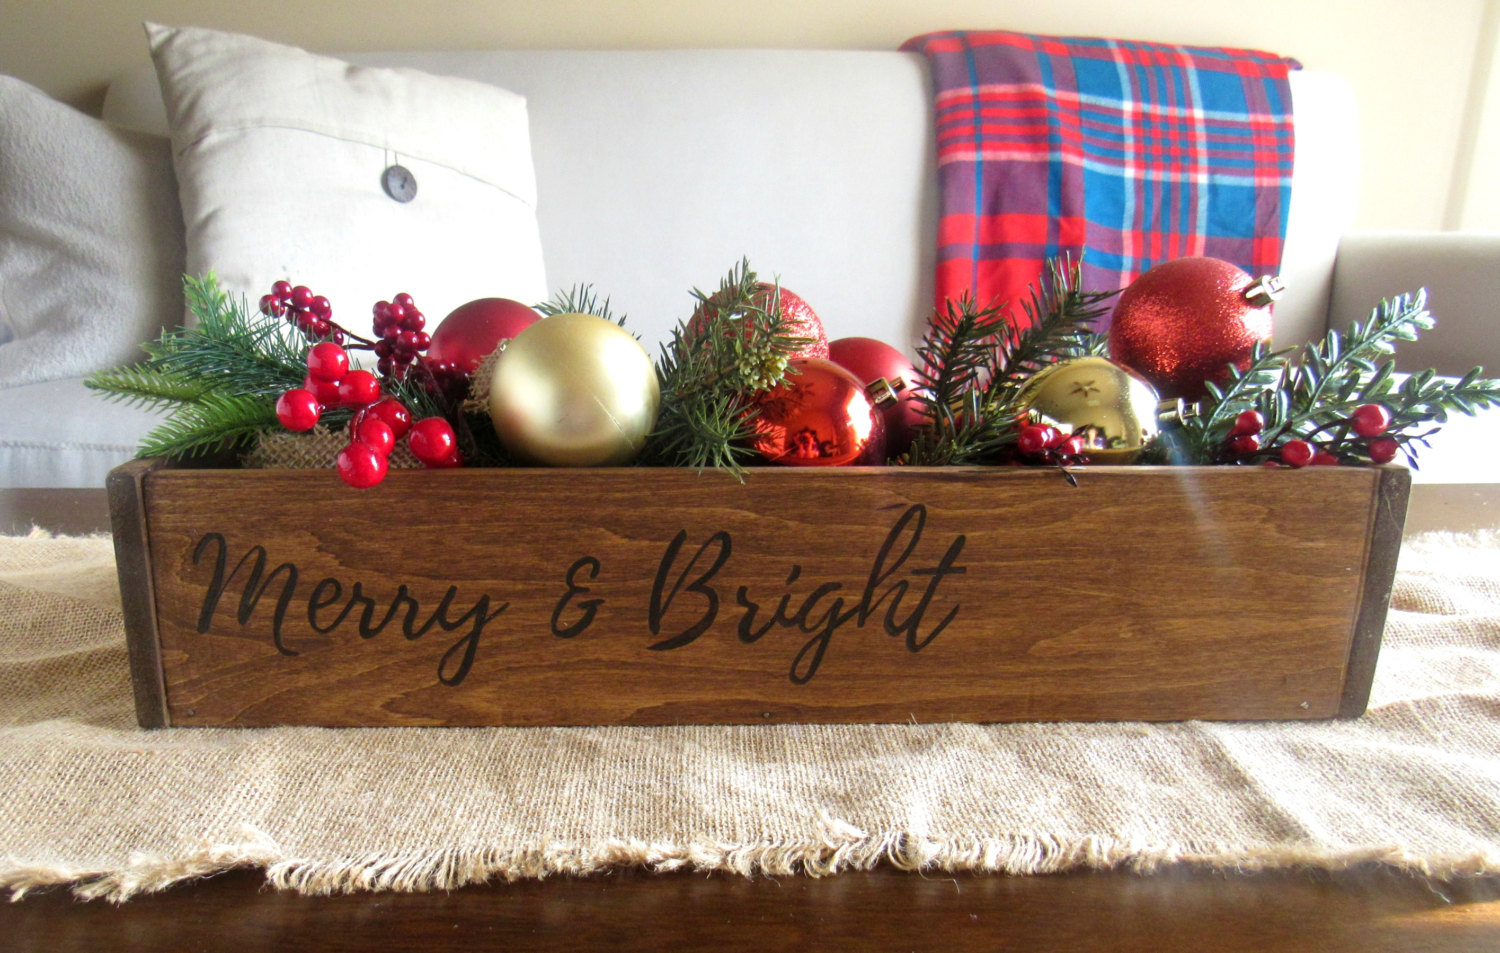 Michigan Gift Idea: Handmade Home Decor From Wood By Al // Featured - Merry & Bright Trough Centerpiece (via Wading in Big Shoes)